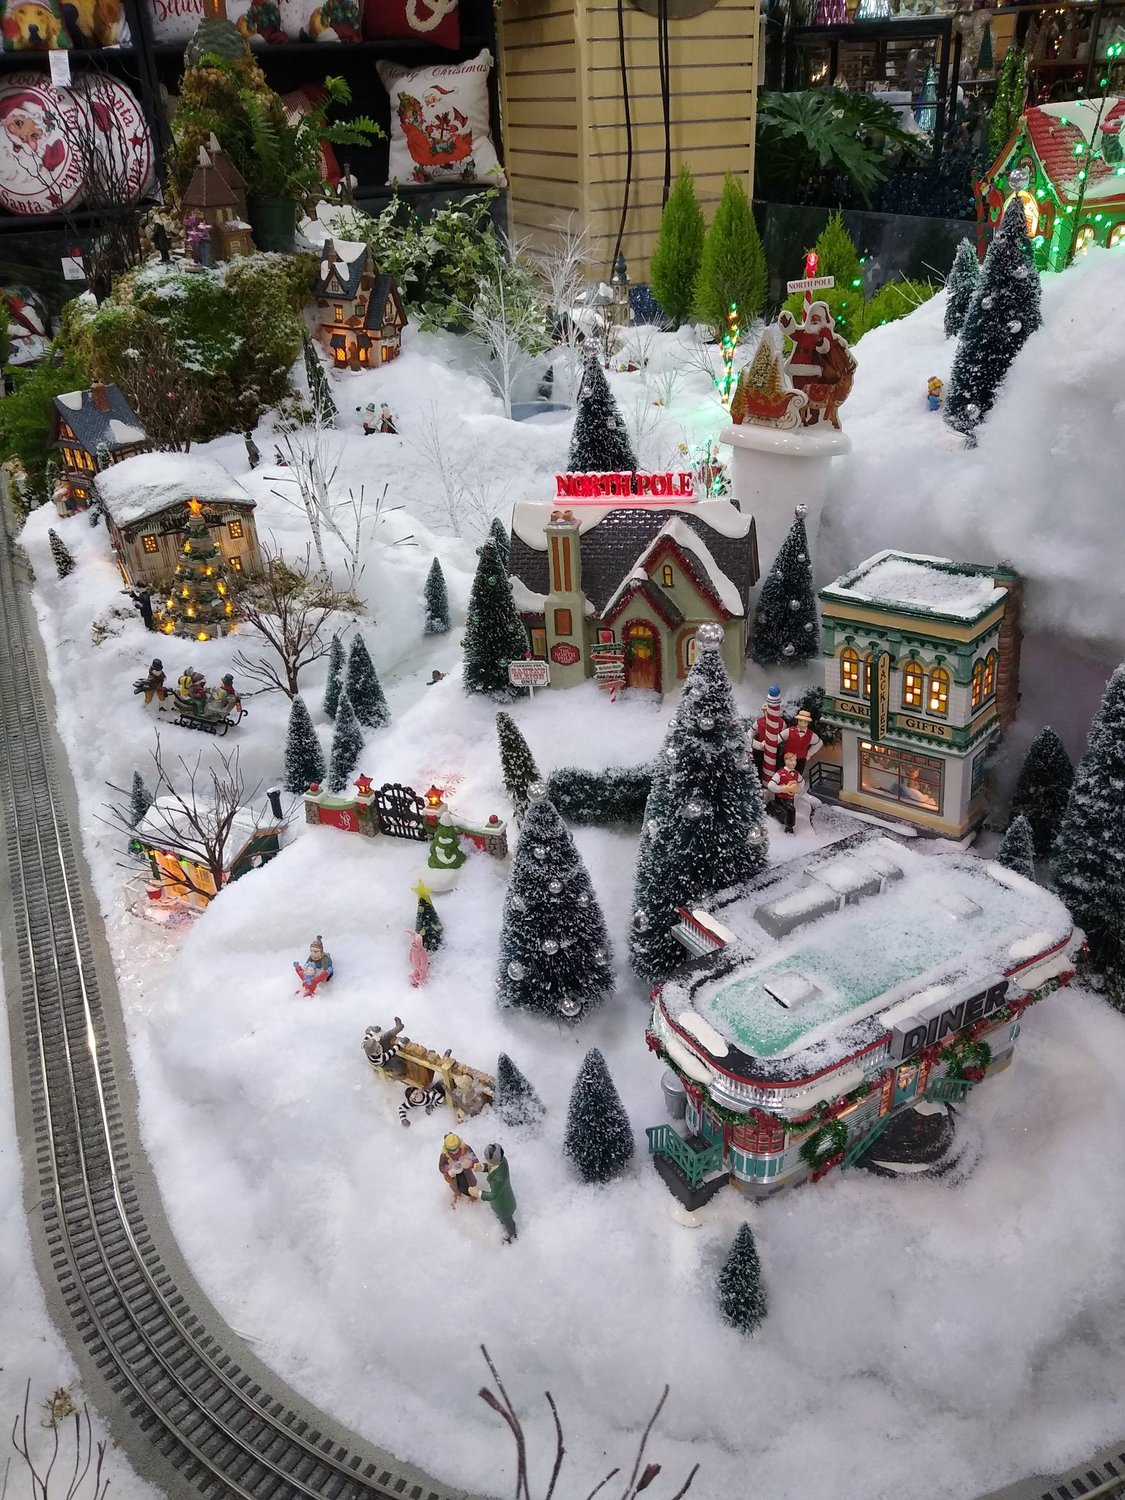 At Homestead Gardens in Severna Park, the train garden is arranged differently each year and visitors can see the Lionel Express train cars navigate around villages with many recognizable landmarks.